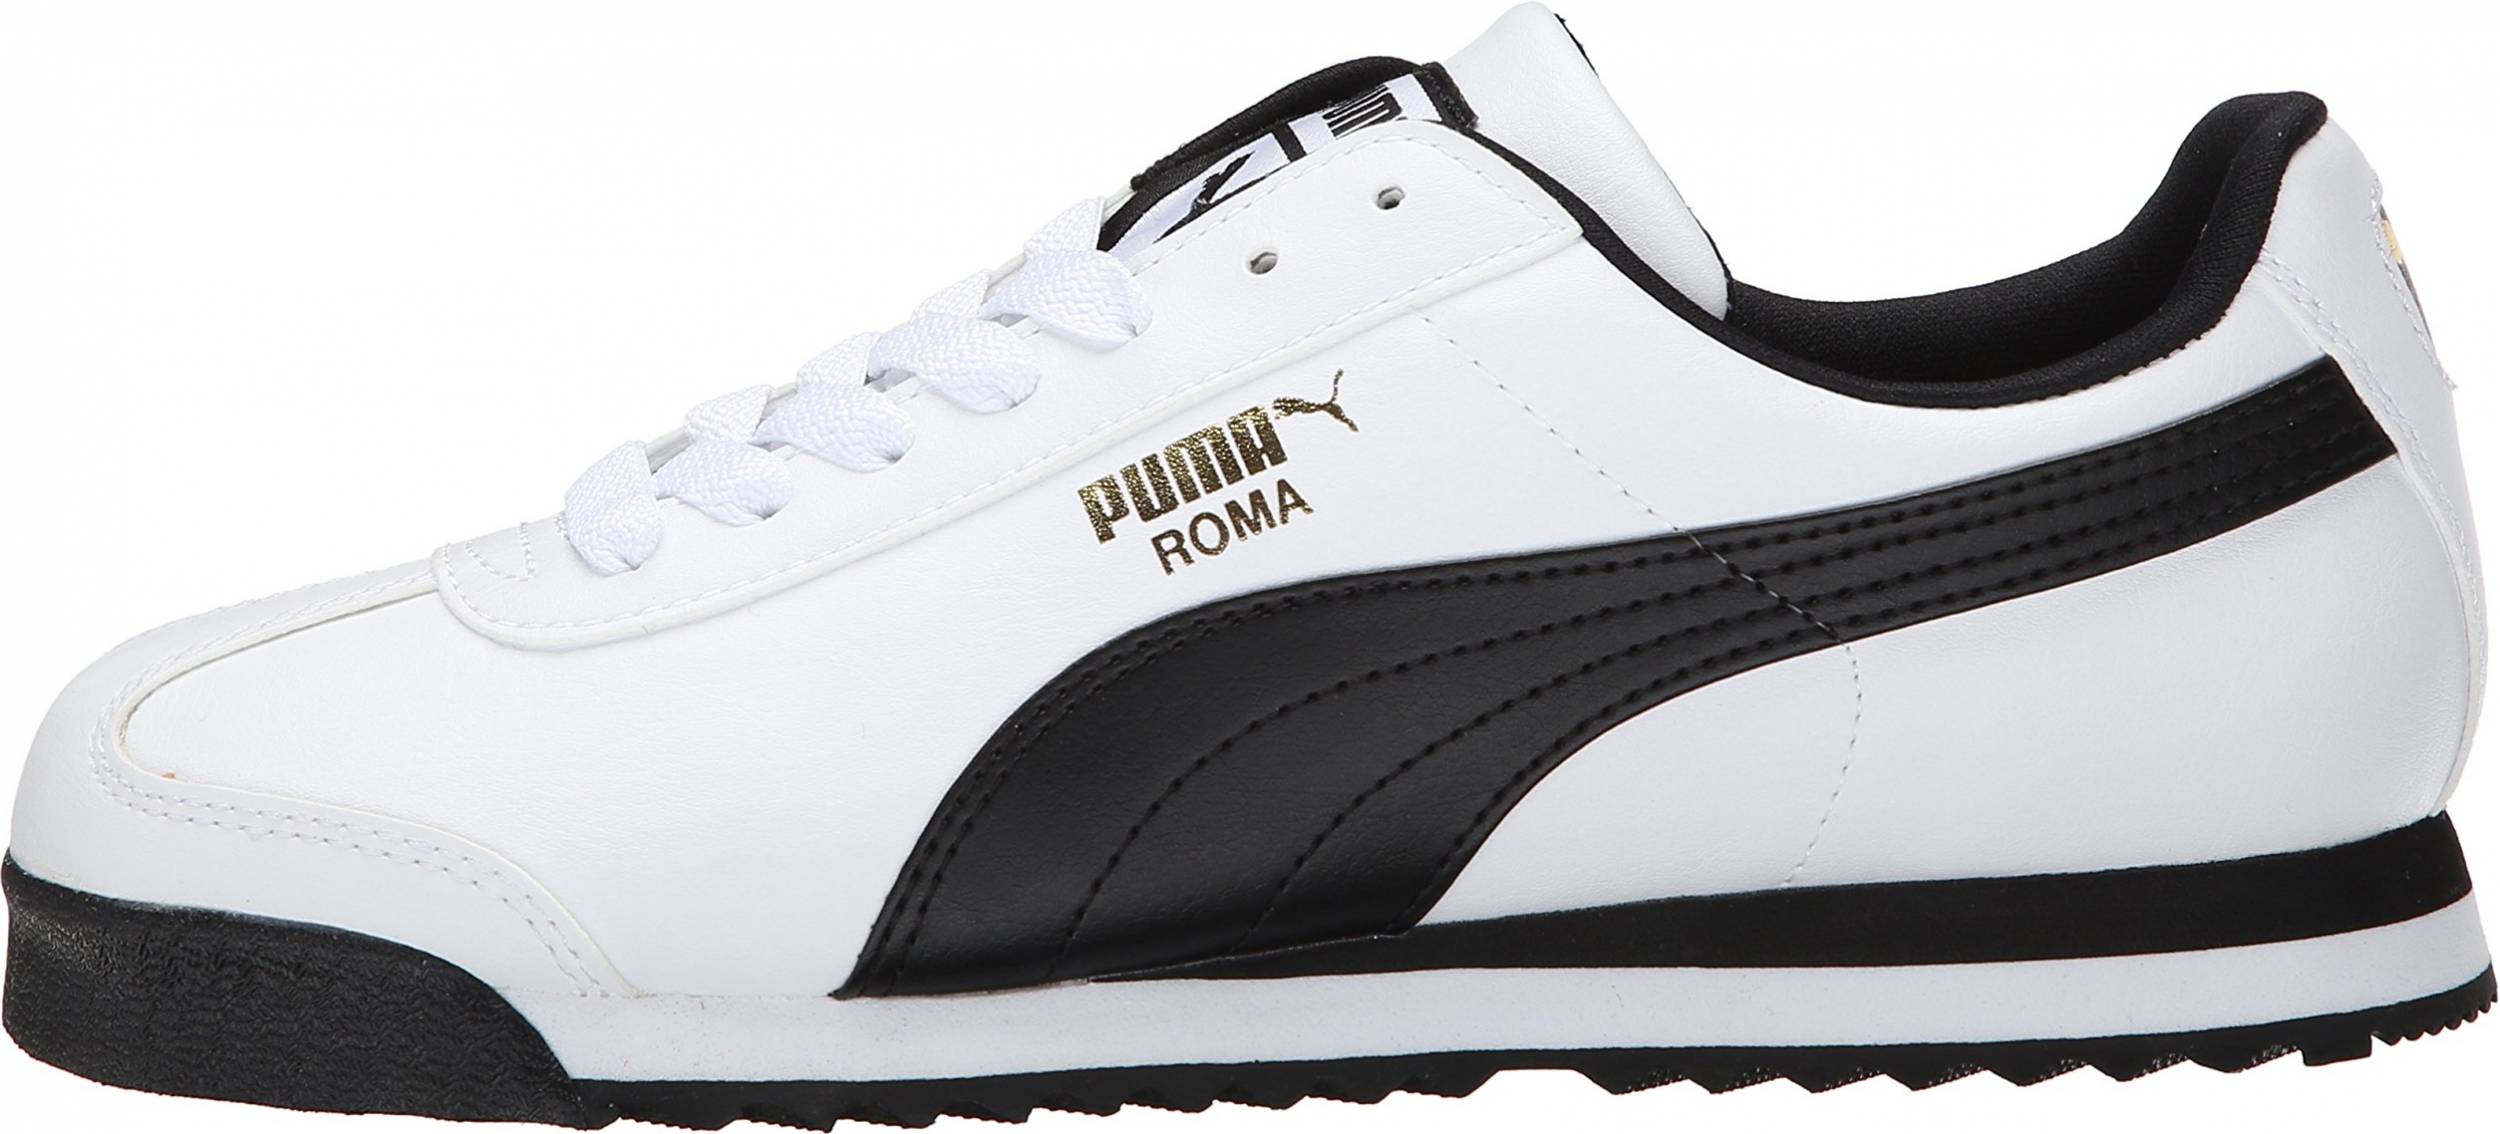 box Condense somewhat 20+ Puma Classics sneakers: Save up to 51% | RunRepeat